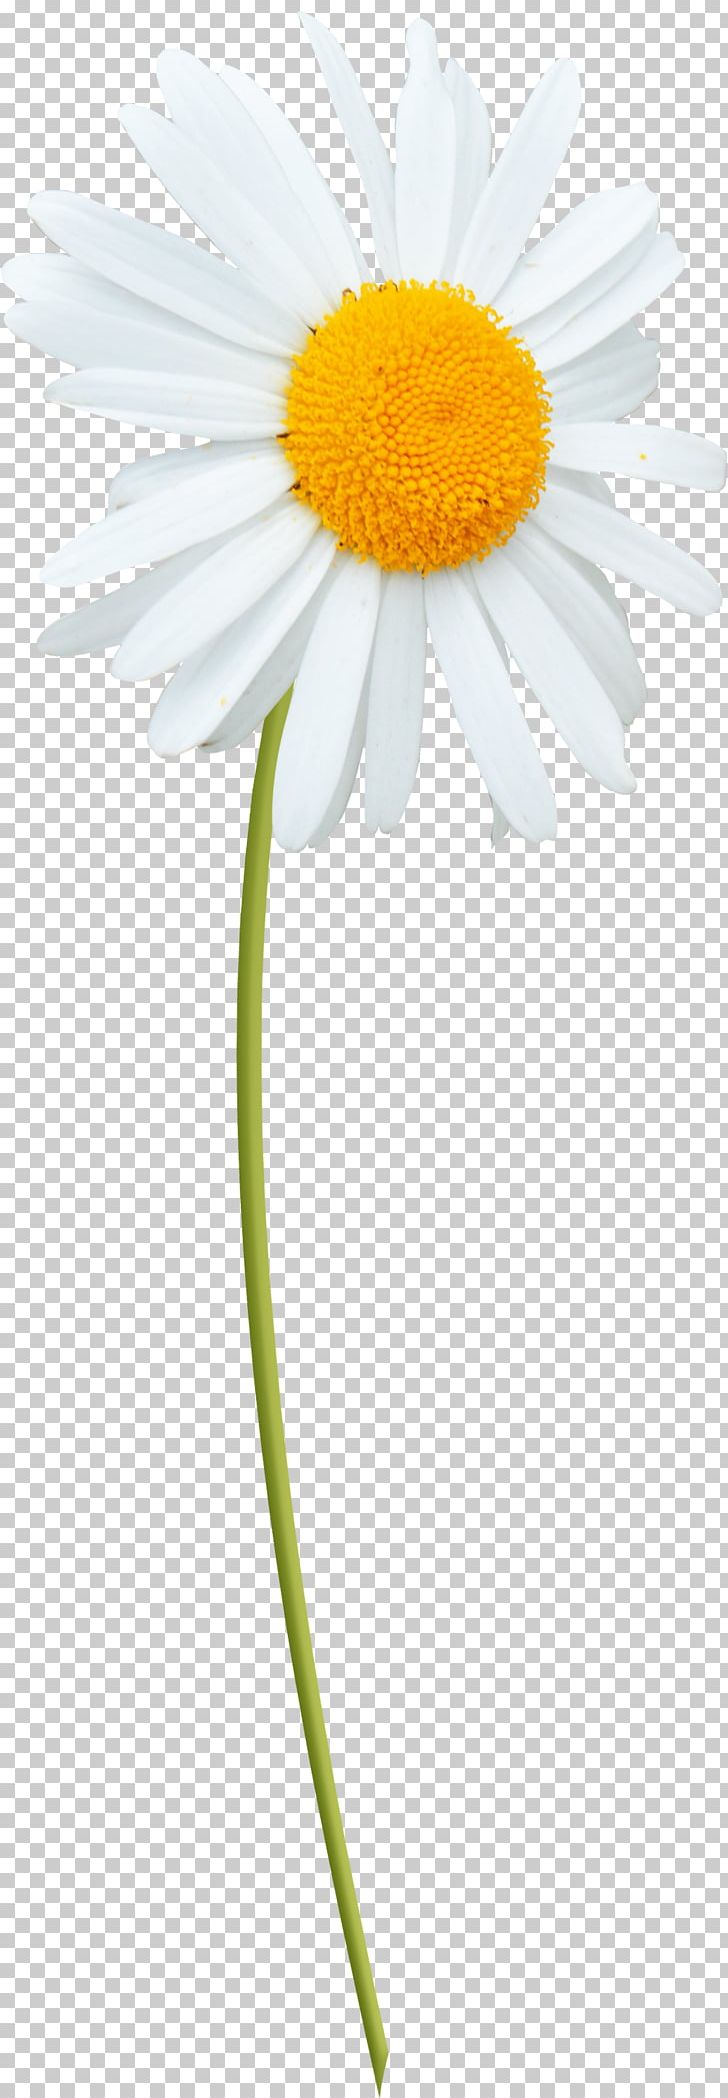 Oxeye Daisy Marguerite Daisy Roman Chamomile Transvaal Daisy Daisy Family PNG, Clipart, Chamaemelum Nobile, Daisy, Daisy Daisy, Daisy Family, Flower Free PNG Download